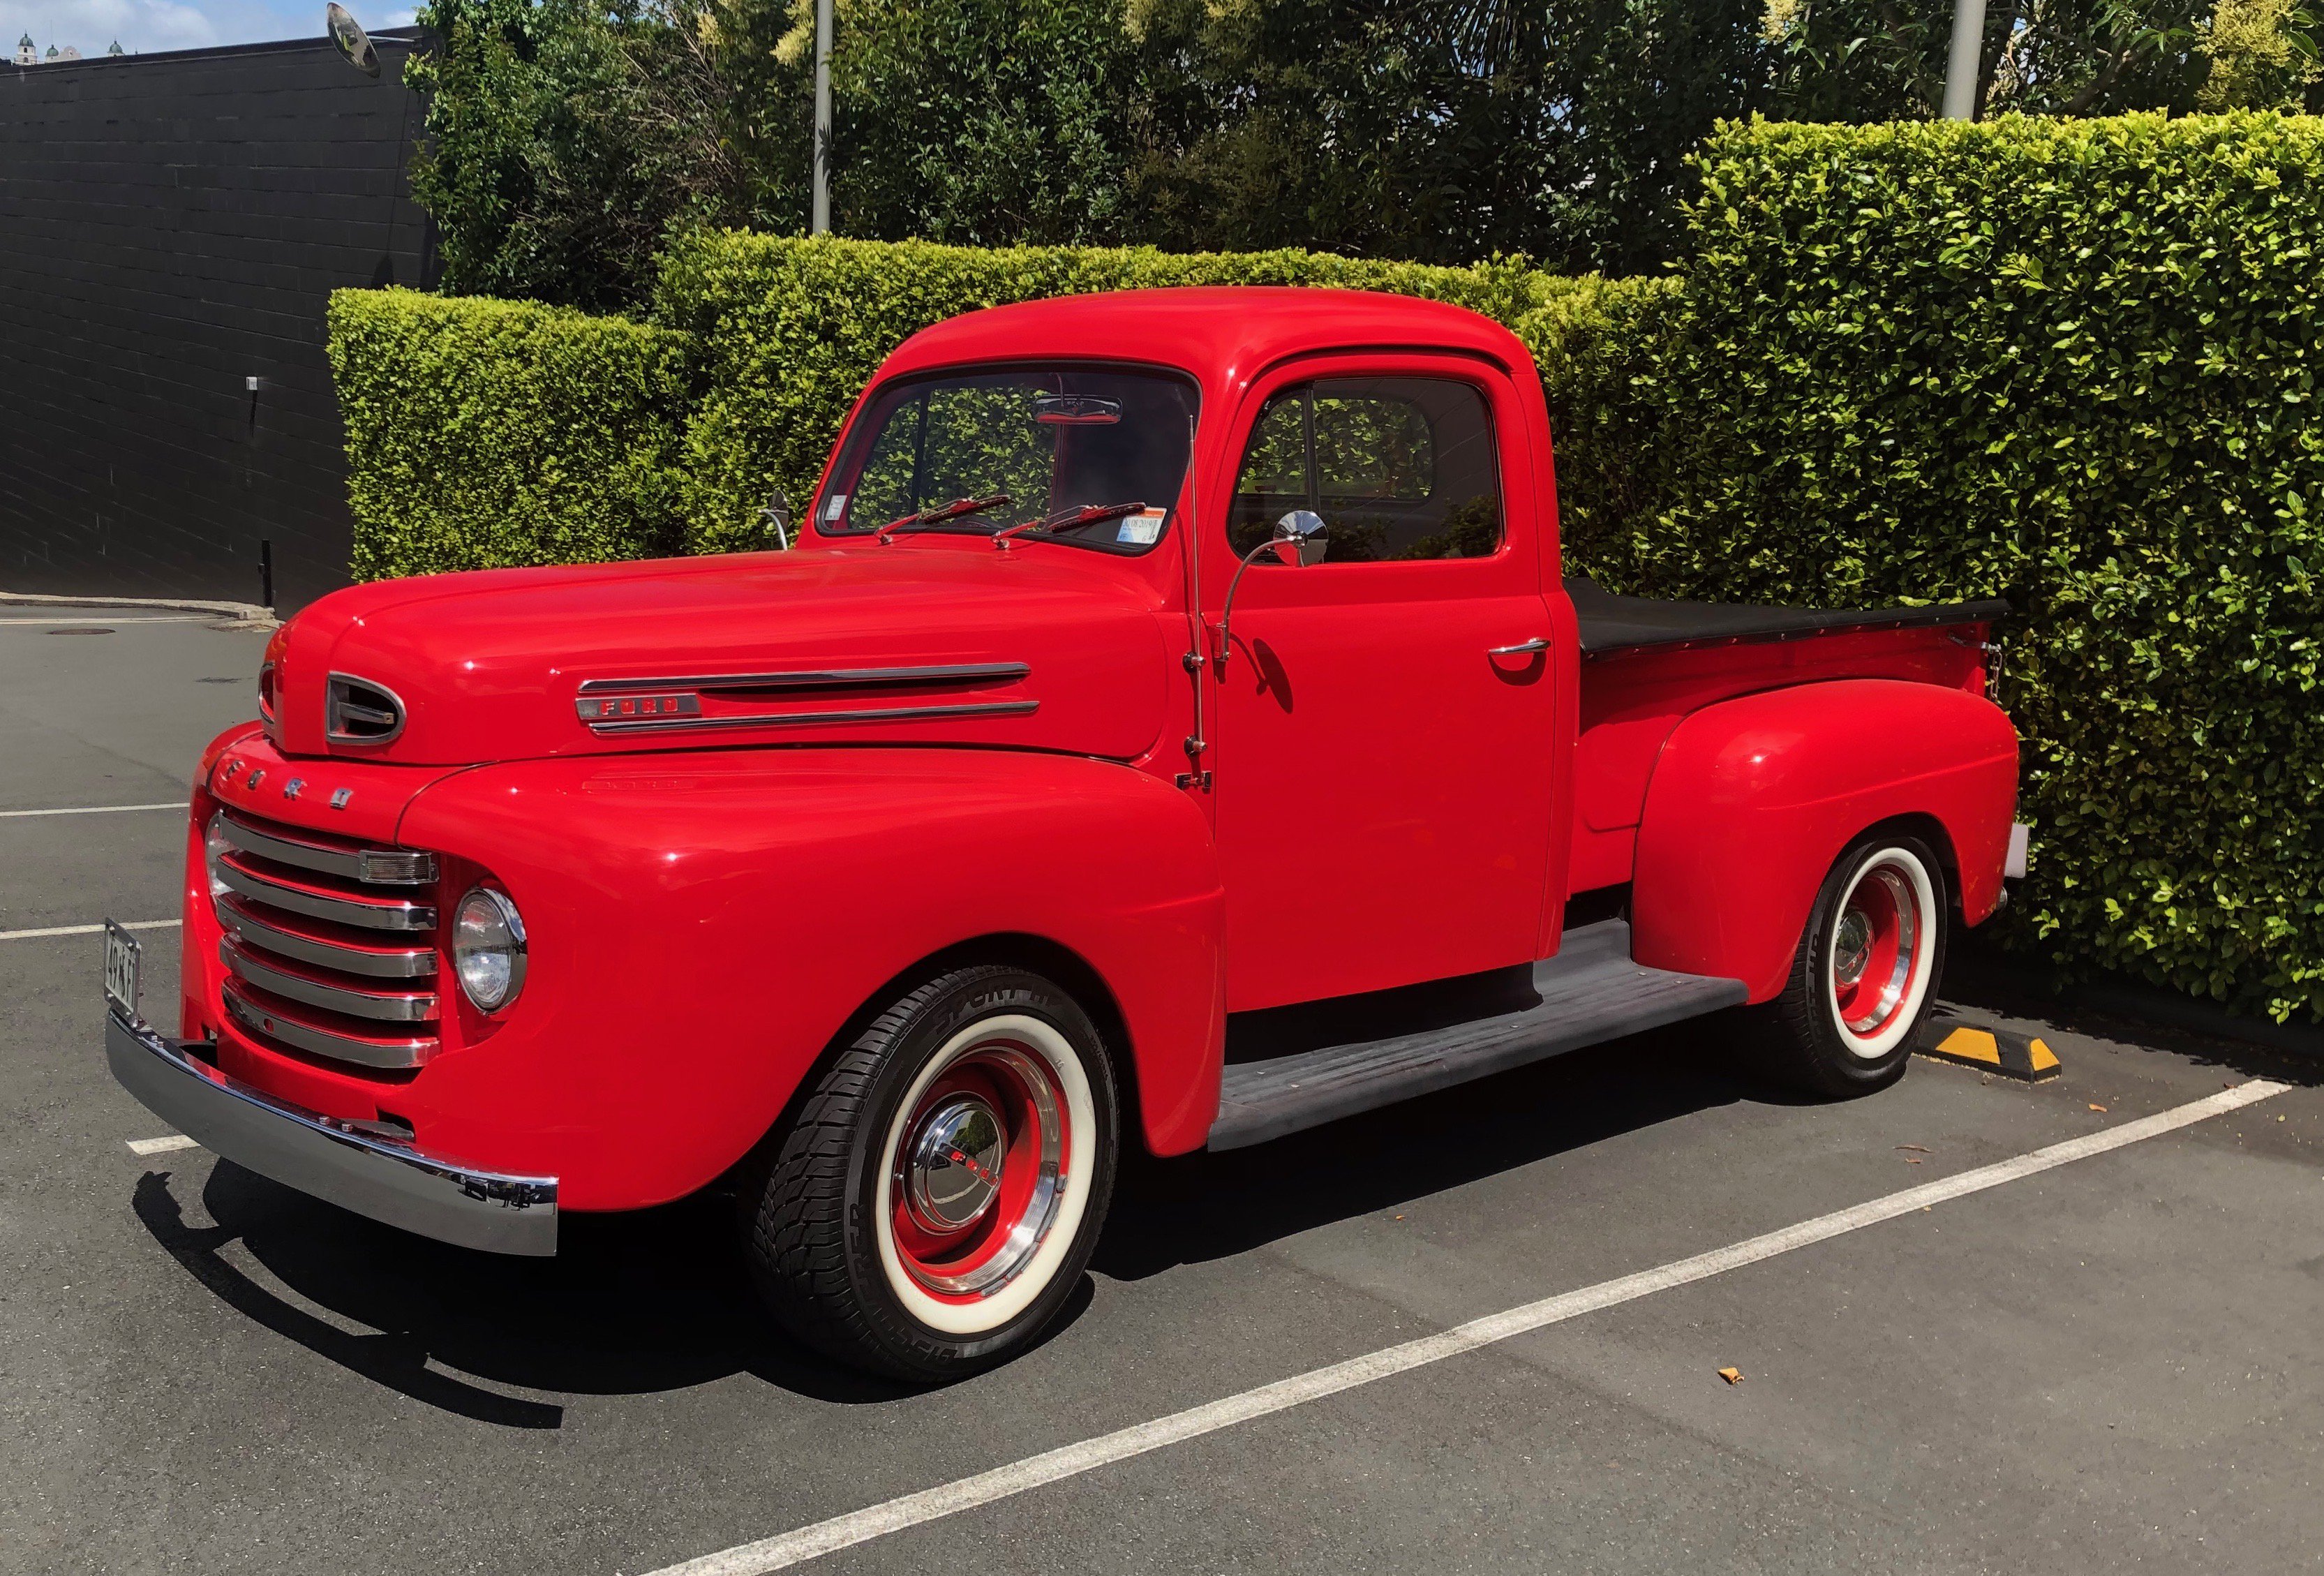 Neill on Twitter: "When i saw this yesterday thought 'THAT'S THE REDDEST RED ON A RED TRUCK I EVER DID SEE'. haven't changed my mind. #red https://t.co/lwfpFuCFbi" /